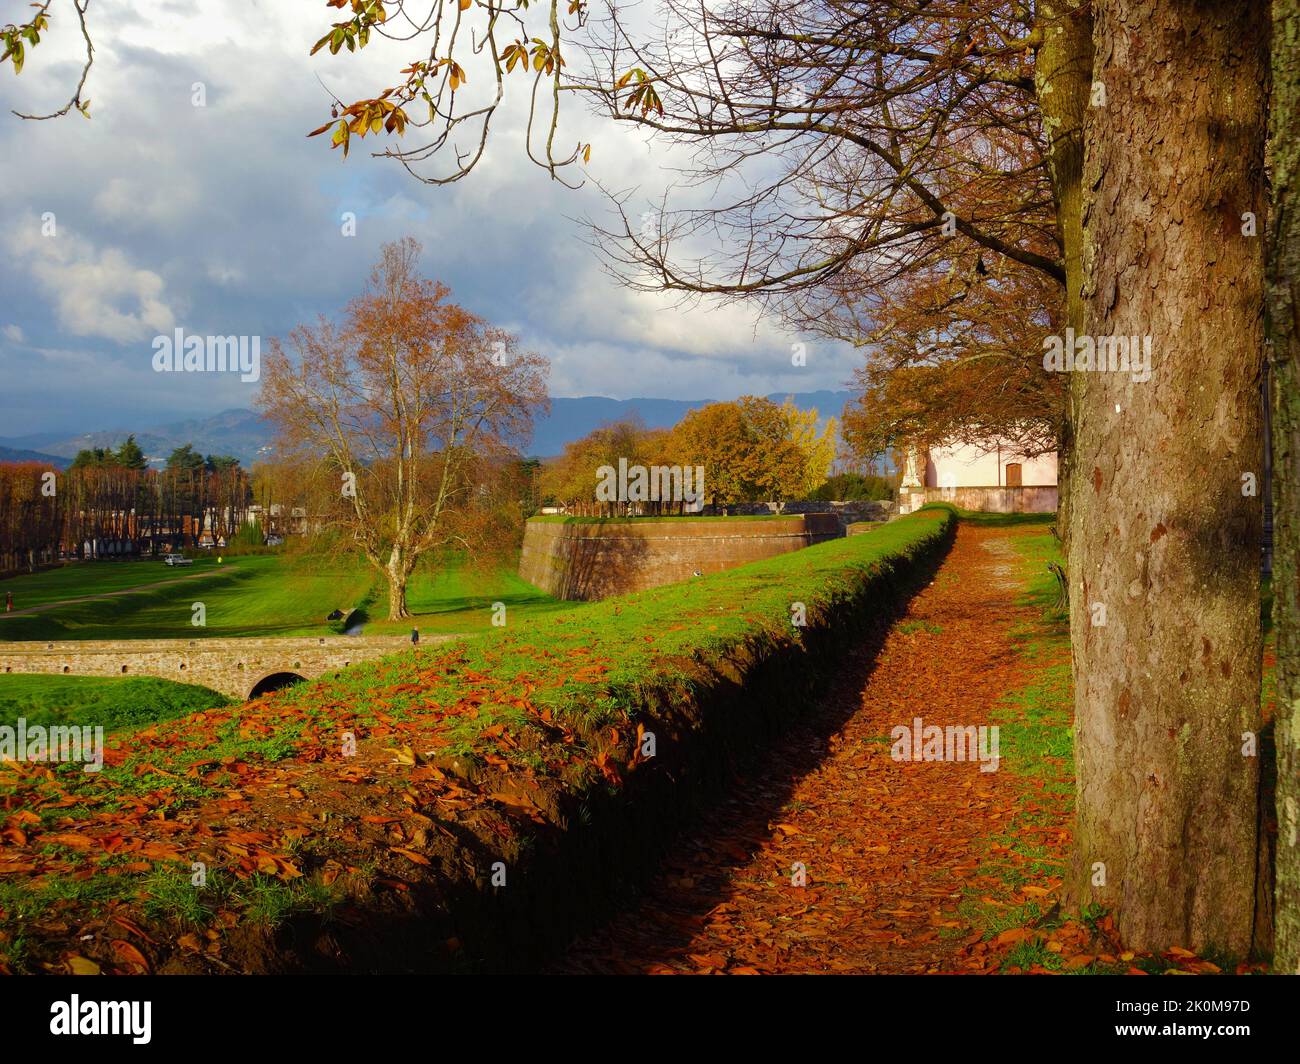 Autumn and foliage in Lucca. Anciet city walls park with autumnal leaves Stock Photo